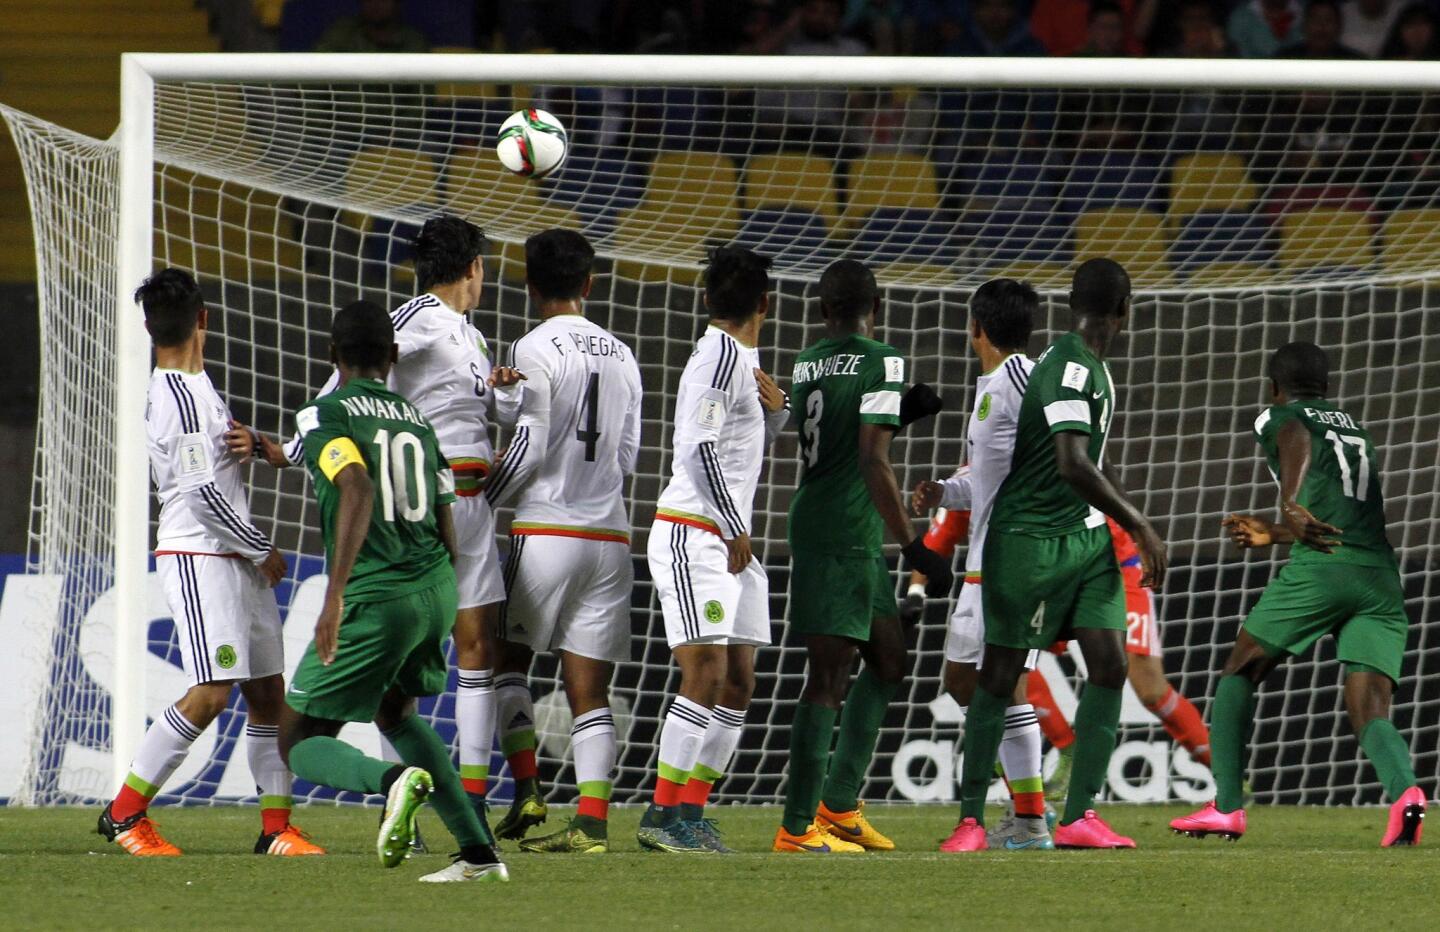 Nigeria's player Kelechi Nwakali (2nd L) scores against Mexico during the FIFA U-17 World Cup Chile 2015 semifinal football match, at Ester Roa Rebolledo stadium in Concepción, Chile, on November 5, 2015. AFP PHOTO / PHOTOSPORT - DRAGOMIR YANKOVICDRAGOMIR YANKOVIC/AFP/Getty Images ** OUTS - ELSENT, FPG, CM - OUTS * NM, PH, VA if sourced by CT, LA or MoD **